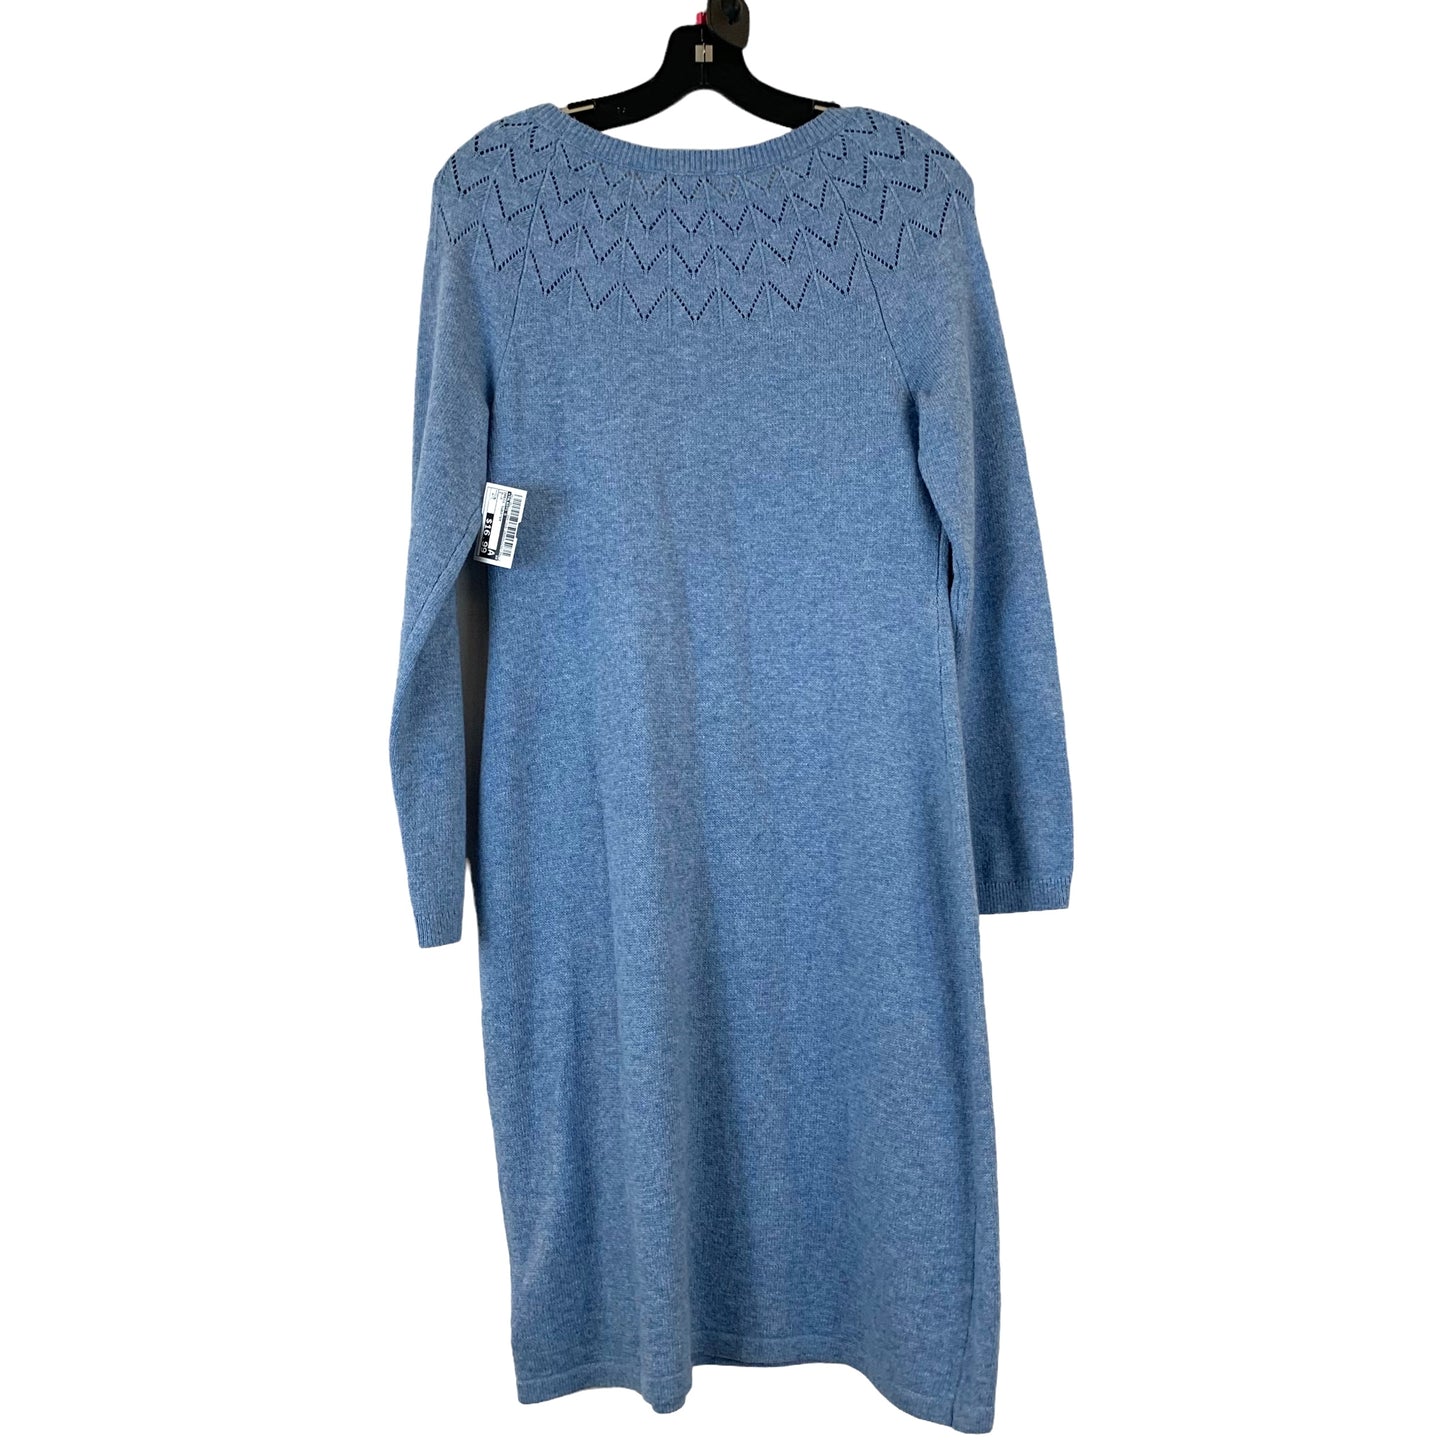 Dress Sweater By Talbots Size: S